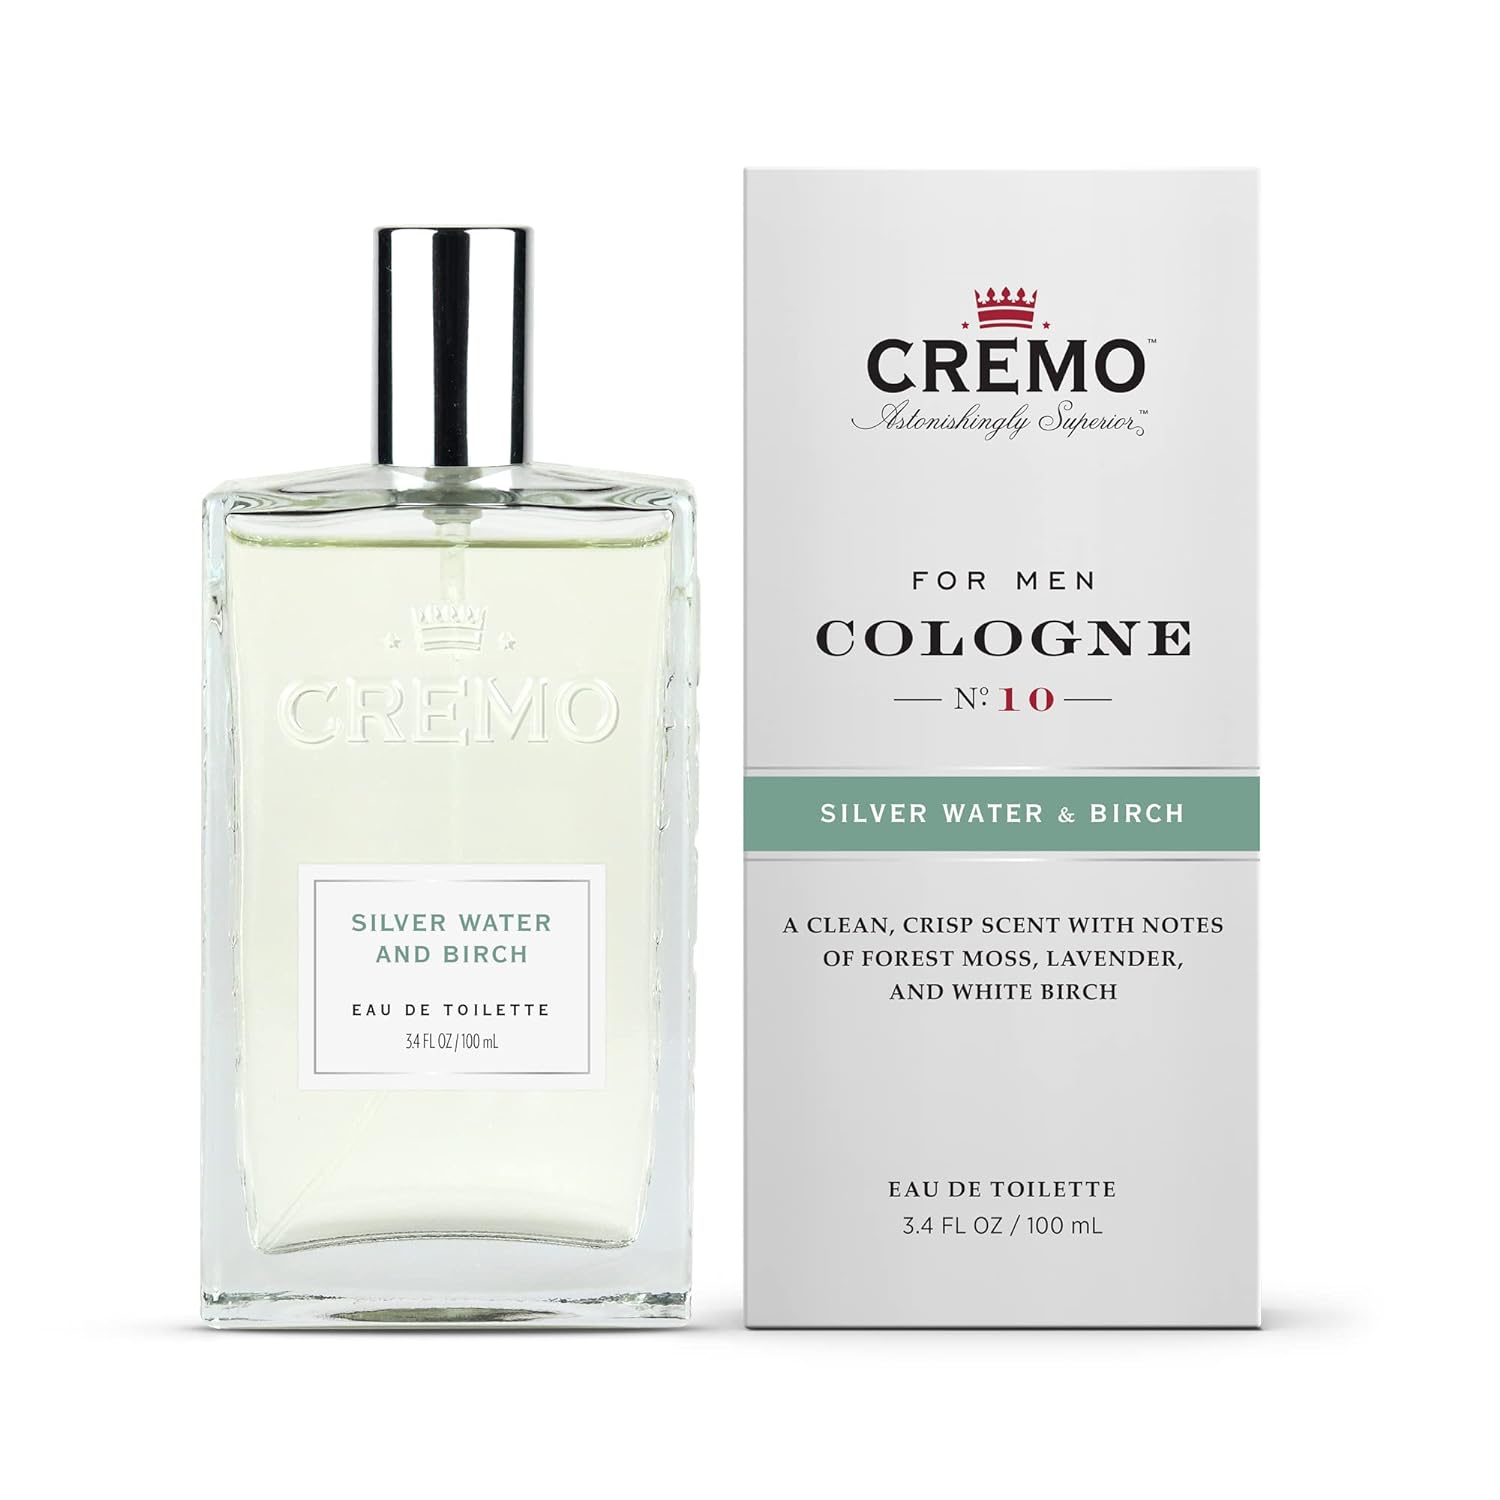 Cremo Silver Water & Birch Cologne Spray, A Crisp Scent with Notes of Forest Moss, Lavender and White Birch, 3.4 Fl Oz : Beauty & Personal Care